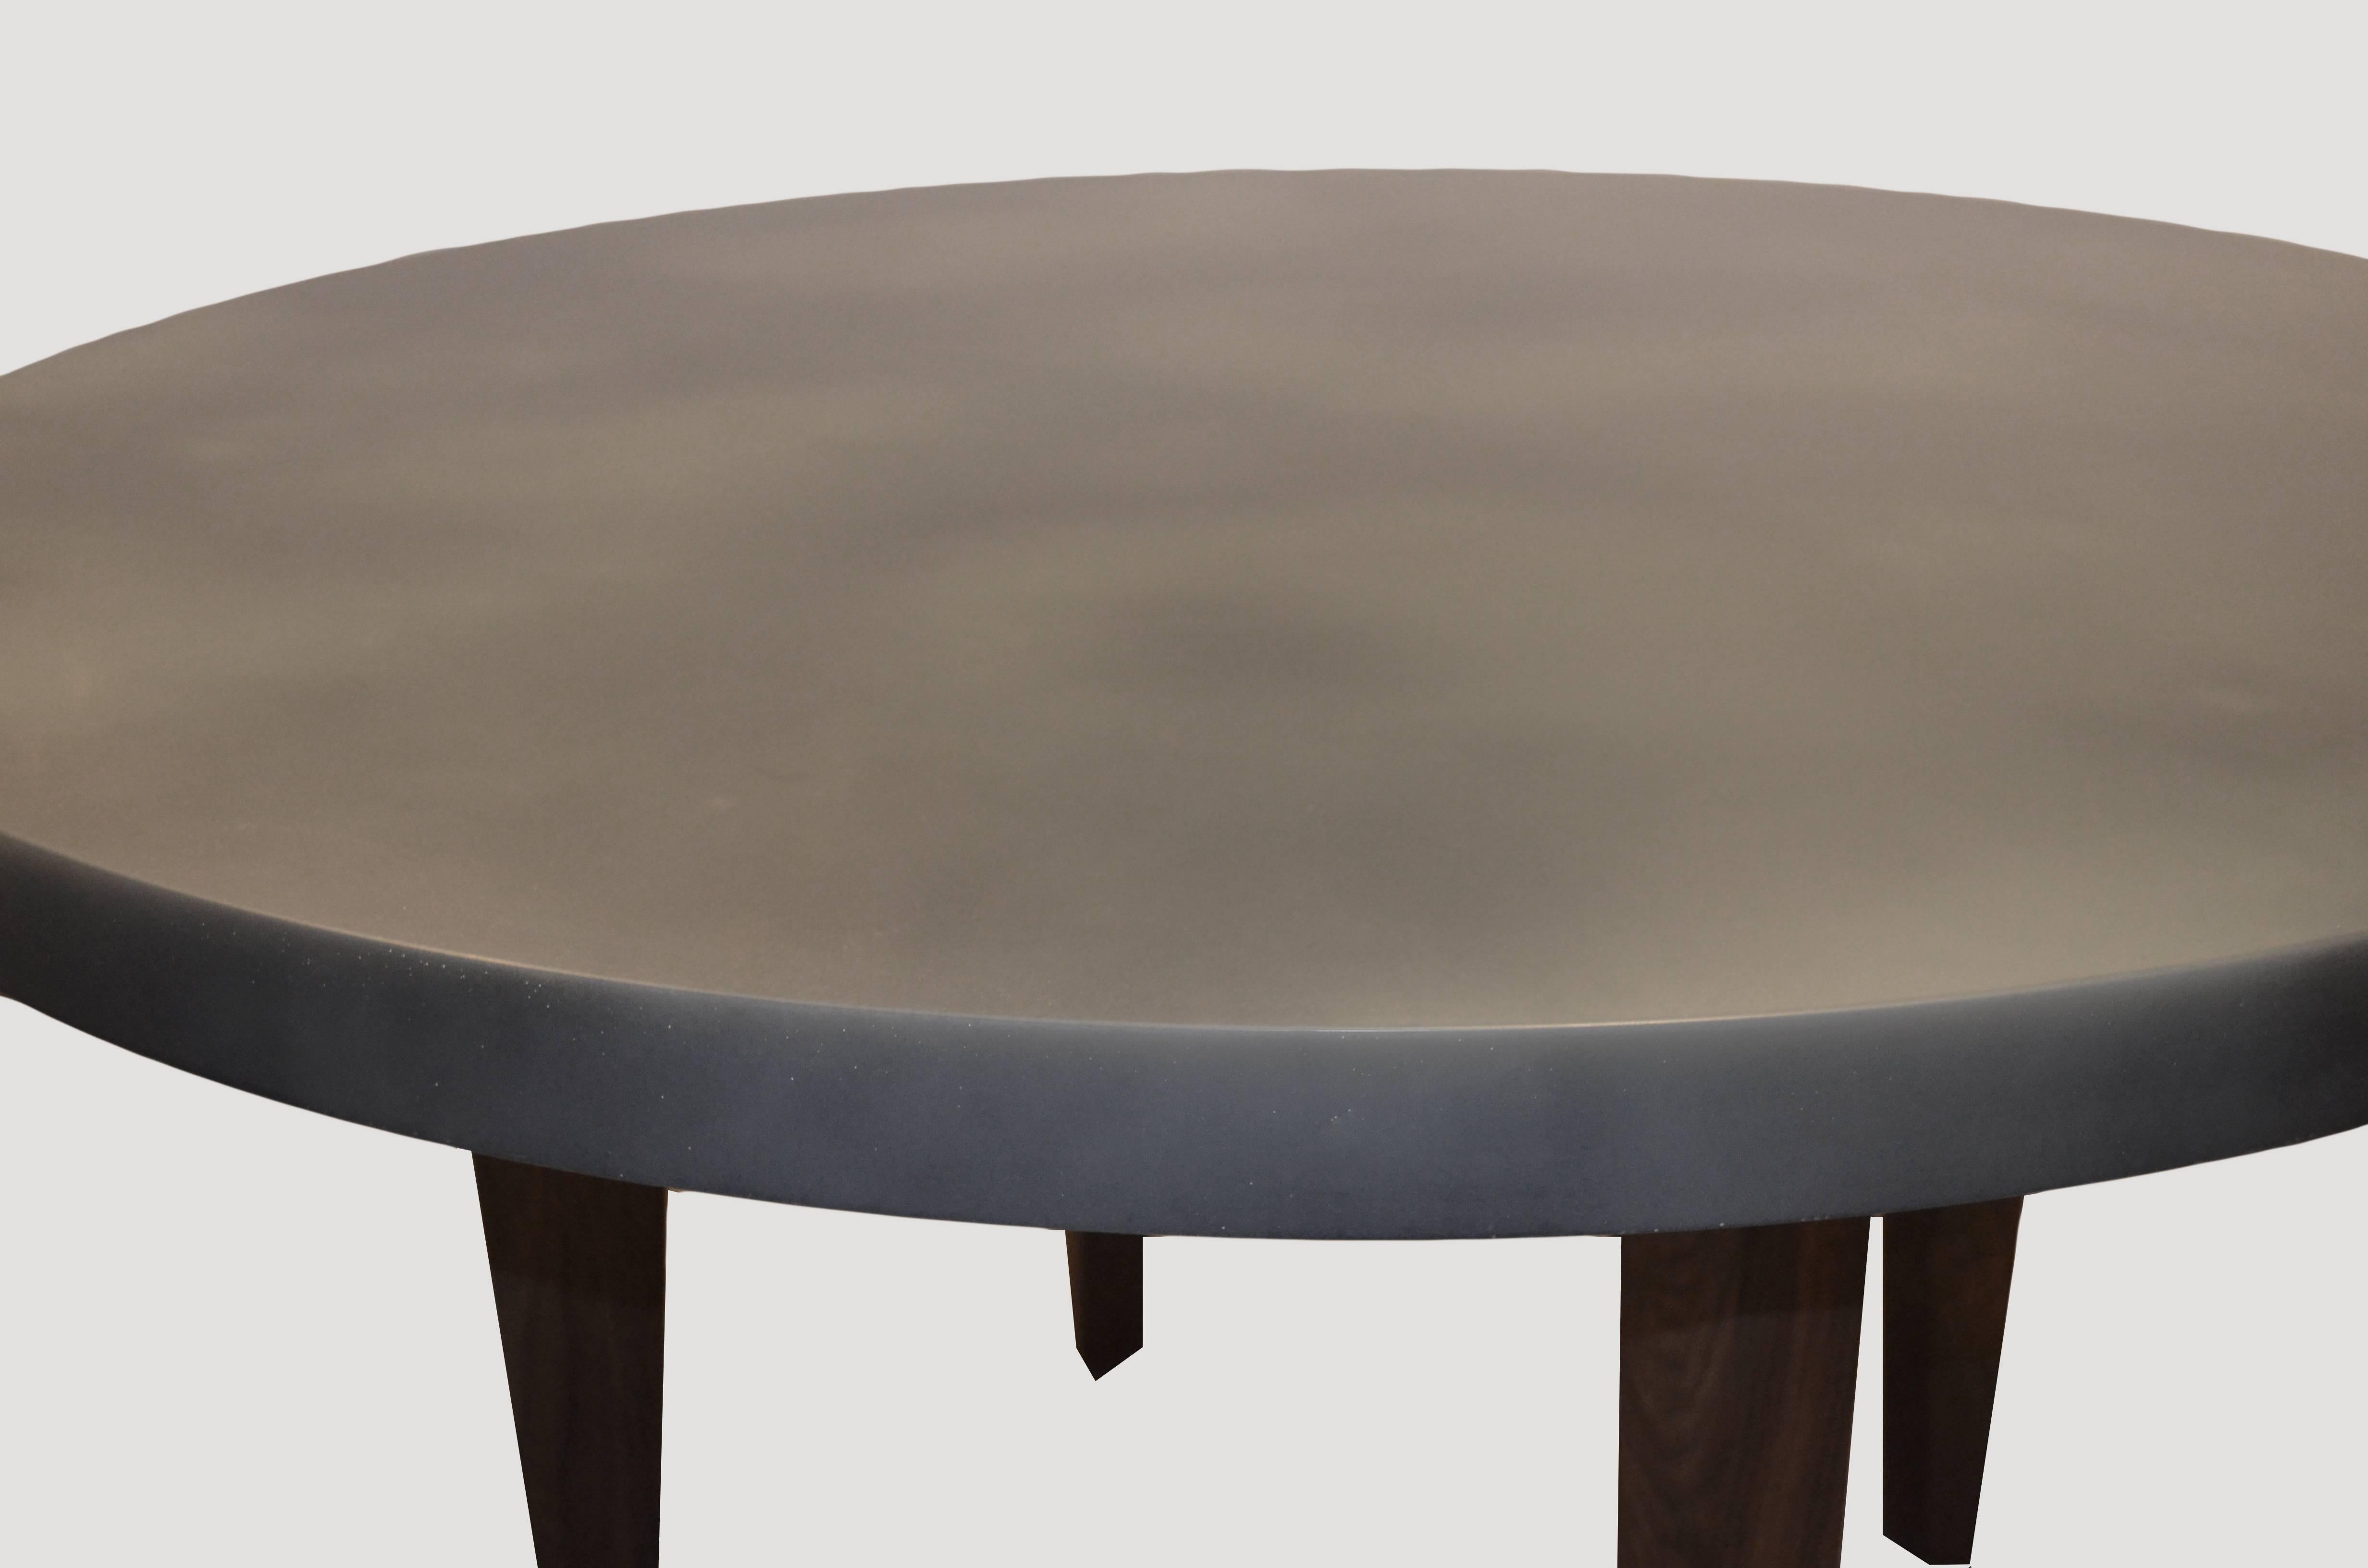 Andrianna Shamaris Black Walnut Wood Table and Resin Coated Top In Excellent Condition For Sale In New York, NY